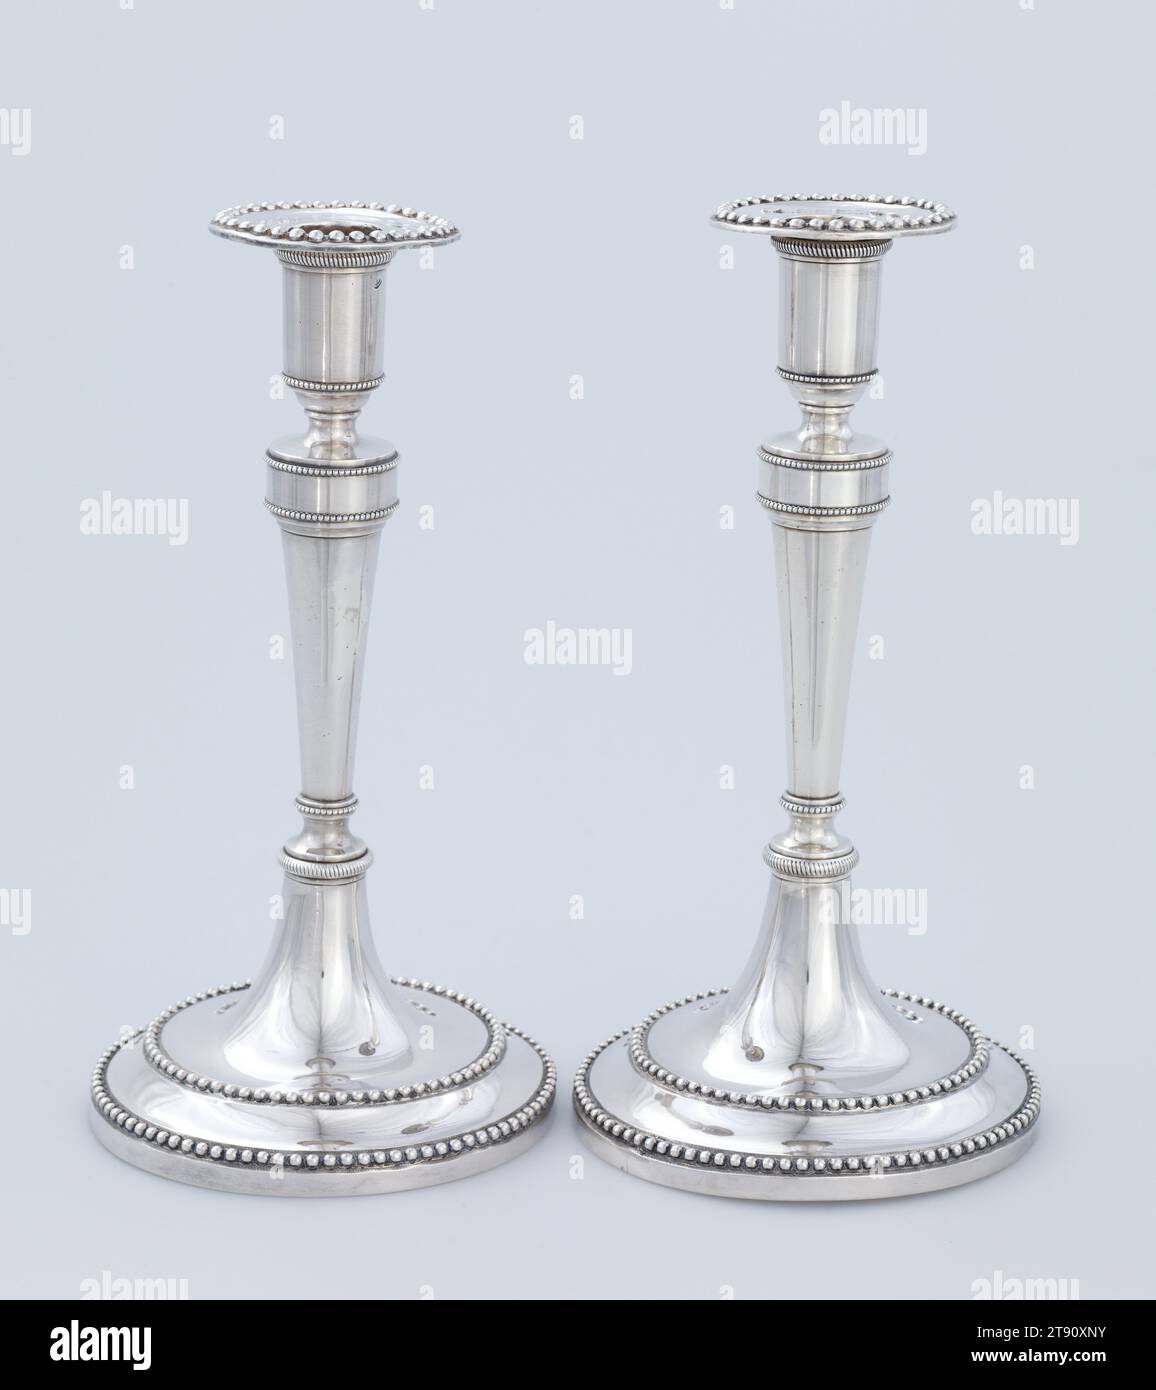 Candlestick, one of a pair, c. 1790, GV; Artist: BB, Italian, (name and dates unknown), 10 1/2 x 5 1/2 x 5 1/2 in. (26.7 x 13.97 x 13.97 cm), Silver, Italy, 18th century Stock Photo